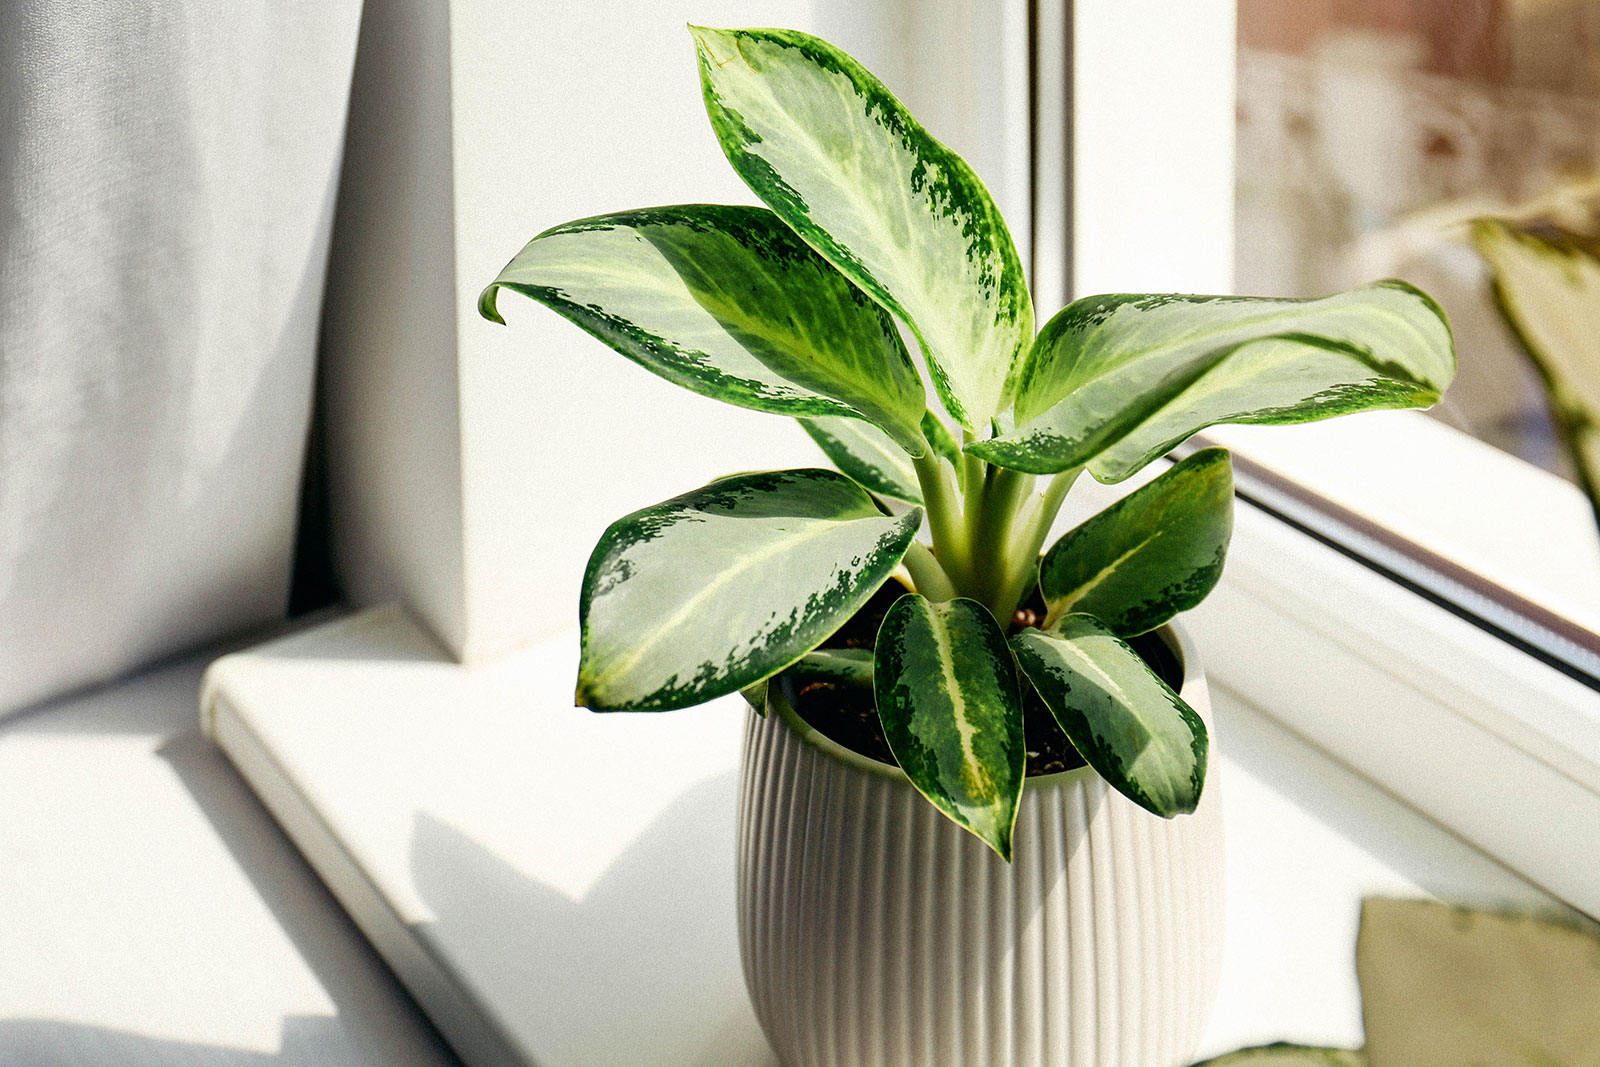 Chinese evergreen houseplant (Aglaonema) in white ceramic pot in front of a window